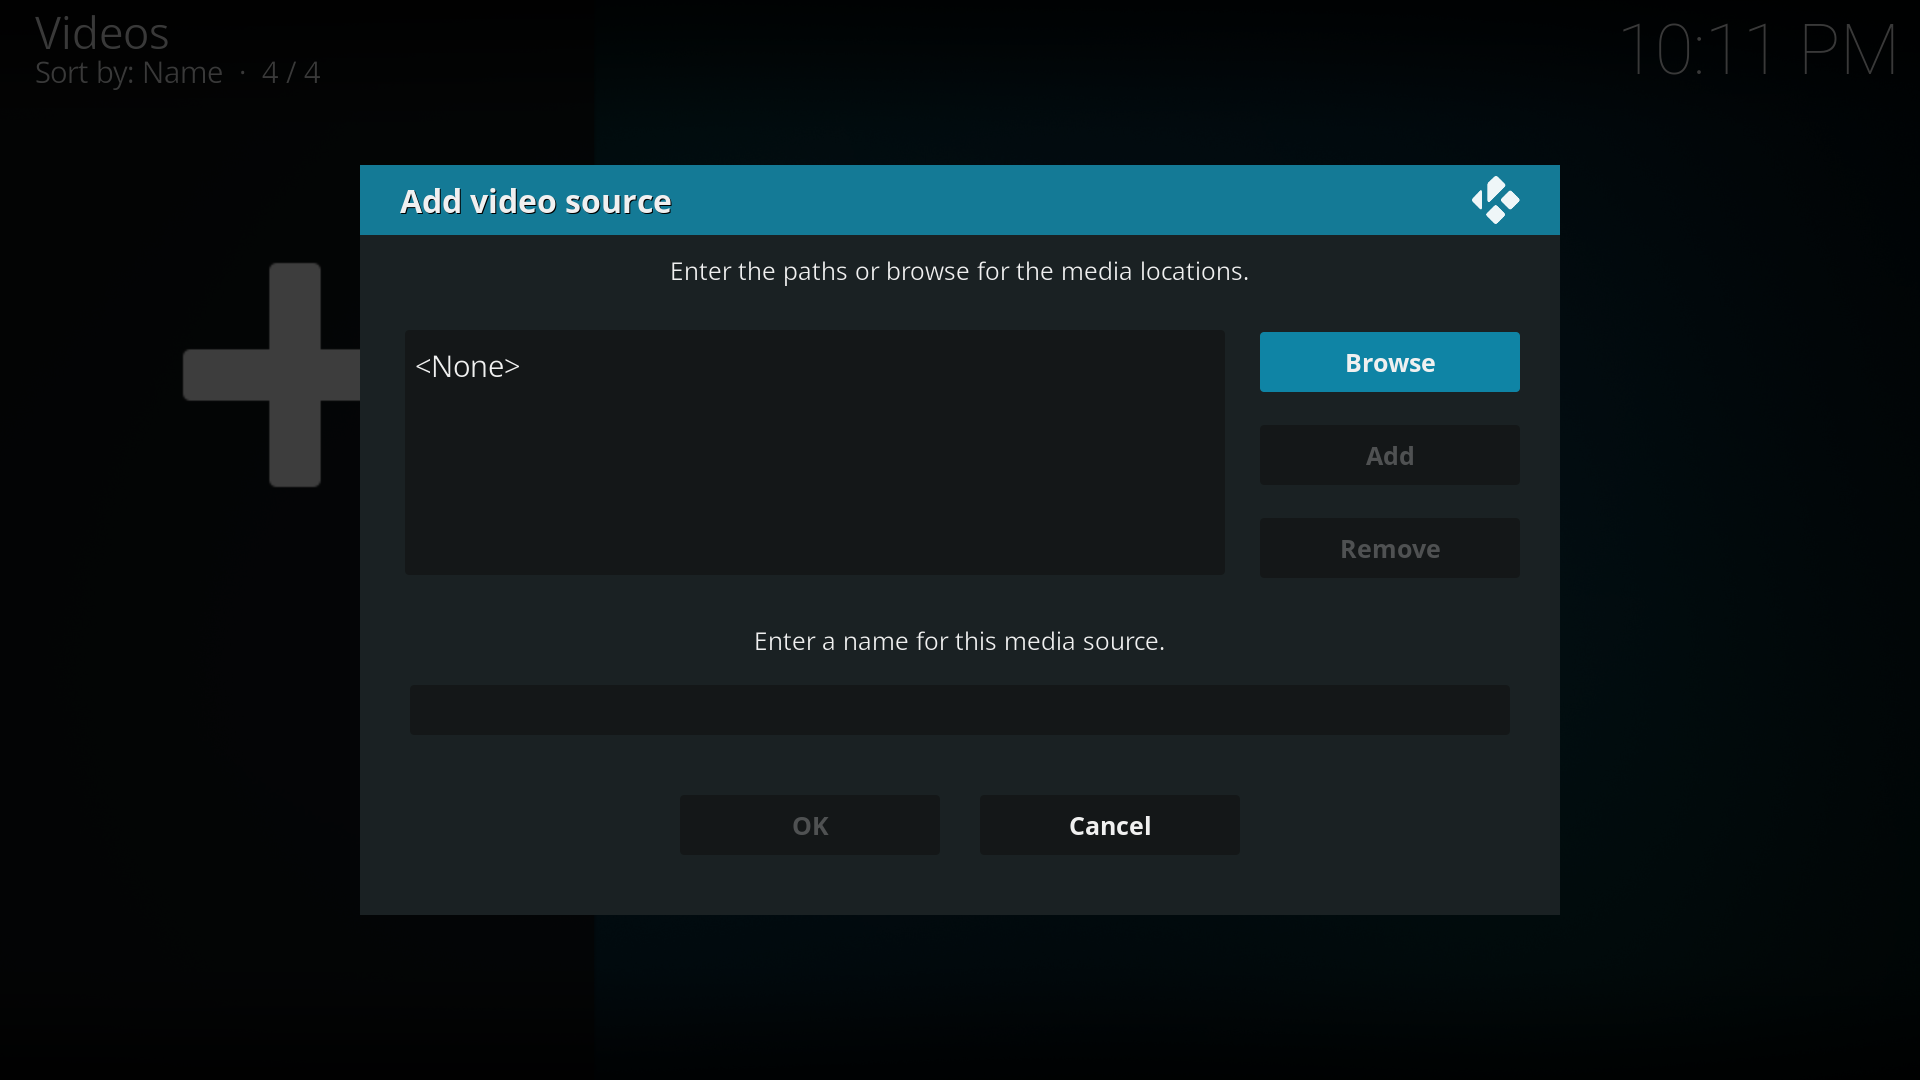 Step 4: The ADD VIDEO SOURCE window will be displayed. Then select the BROWSE button. Note: You can also type a local or network file path directly into this box, if you already know the address/path. For example, smb://192.162.0.4 or smb://Your_Device_Name could be typed in directly and saved, which will skip the "browsing" step.